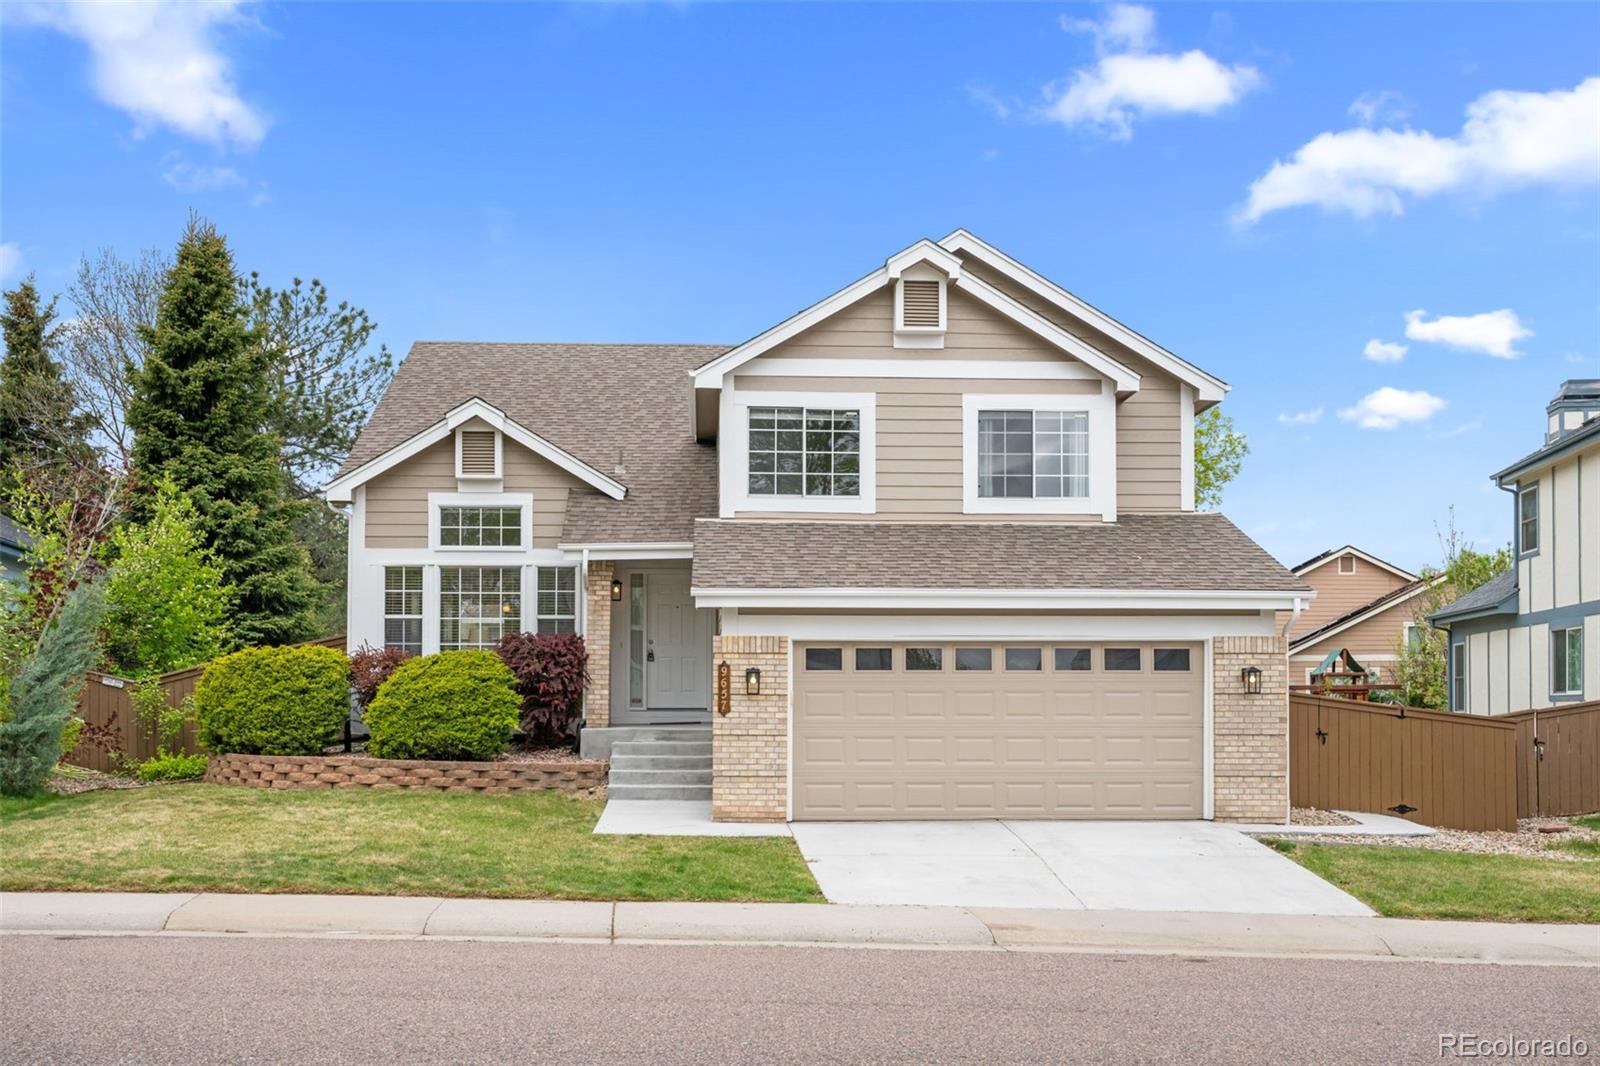 9657  Red Oakes Drive, highlands ranch MLS: 3300020 Beds: 4 Baths: 4 Price: $650,000